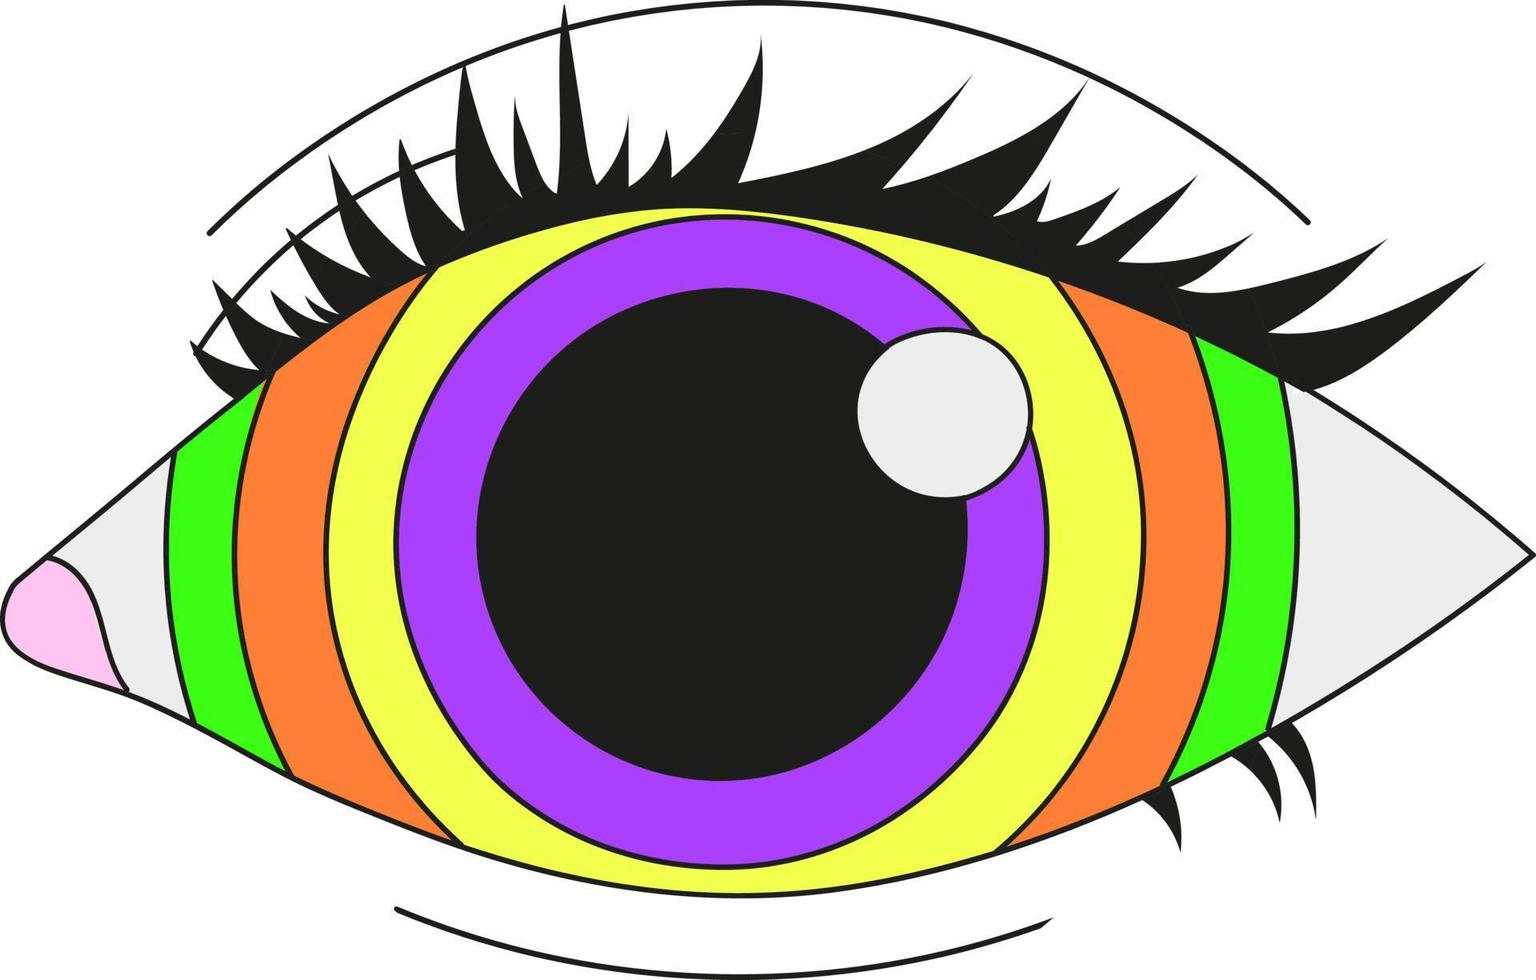 Multicolored psychedelic eye with a wide pupil. Vector illustration isolated on a white background.